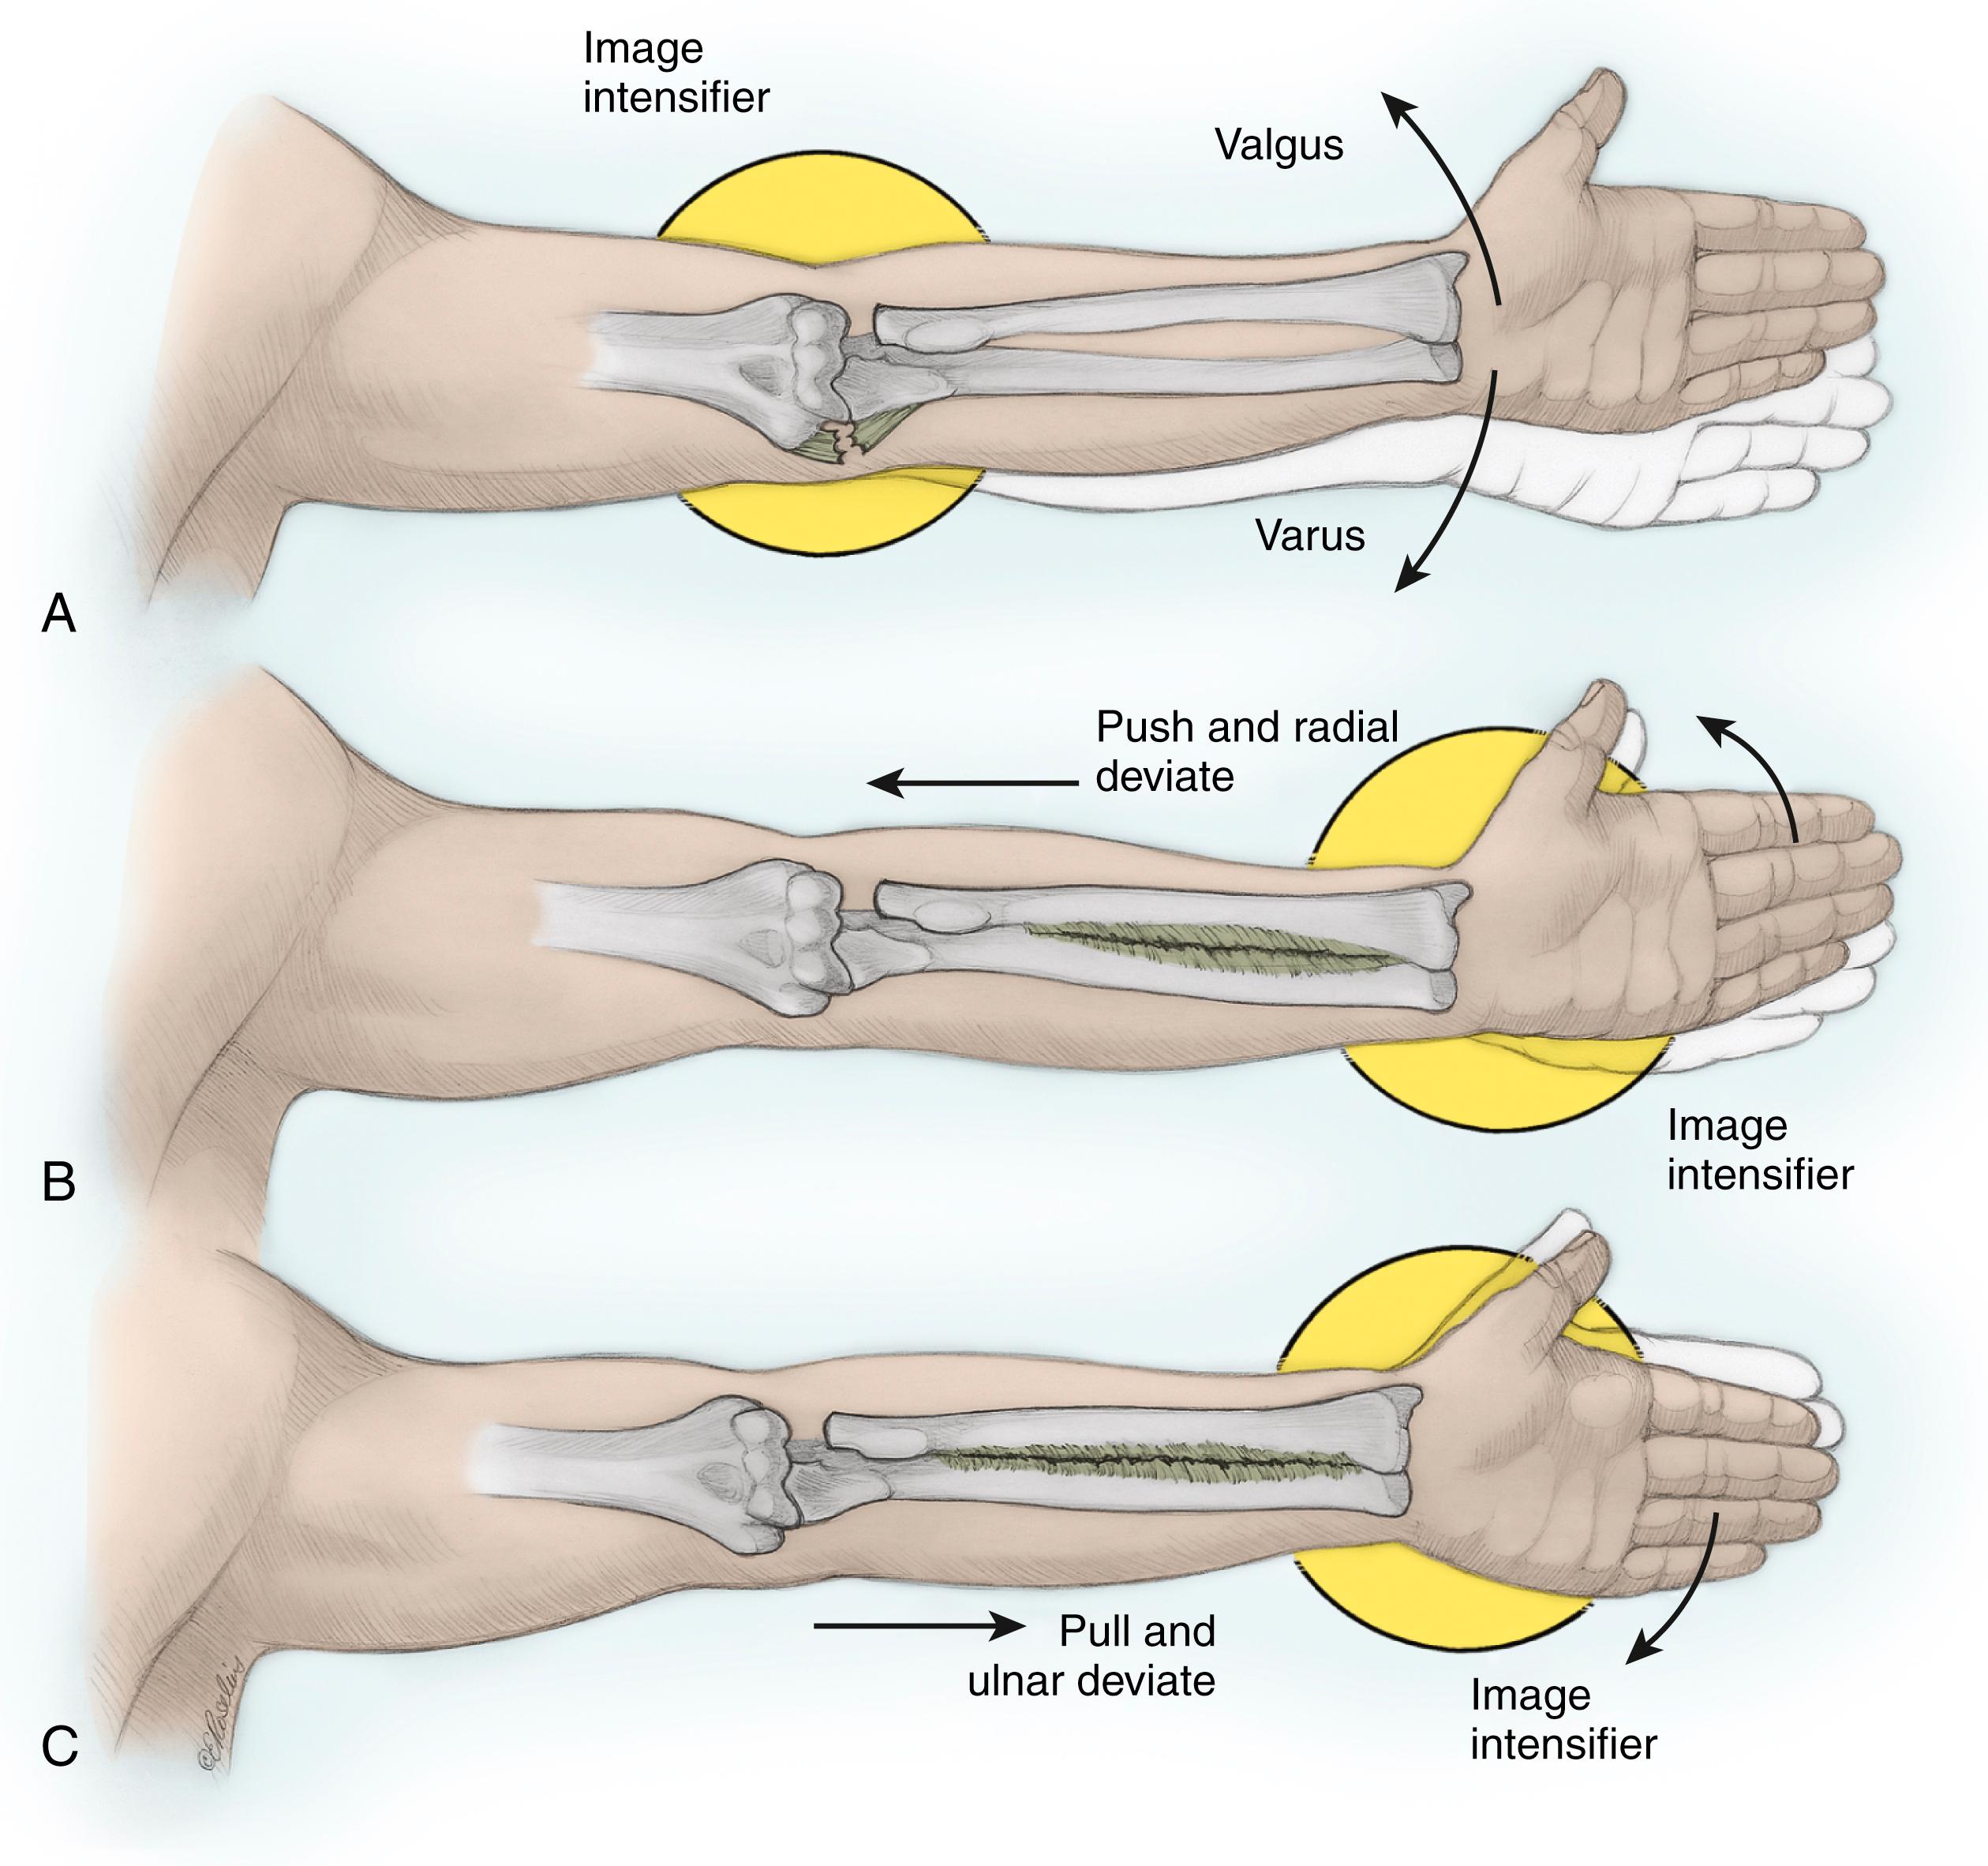 Fig. 19.12, A, A valgus and varus stress test of the elbow should be performed to evaluate the integrity of the medial and lateral collateral ligaments using an image intensifier before excision of the radial head. B and C, Similarly, the axial stability of the forearm should be evaluated by alternatively applying axial traction/ulnar deviation and compression/radial deviation to the forearm and wrist while monitoring ulnar variance at the wrist with an image intensifier.